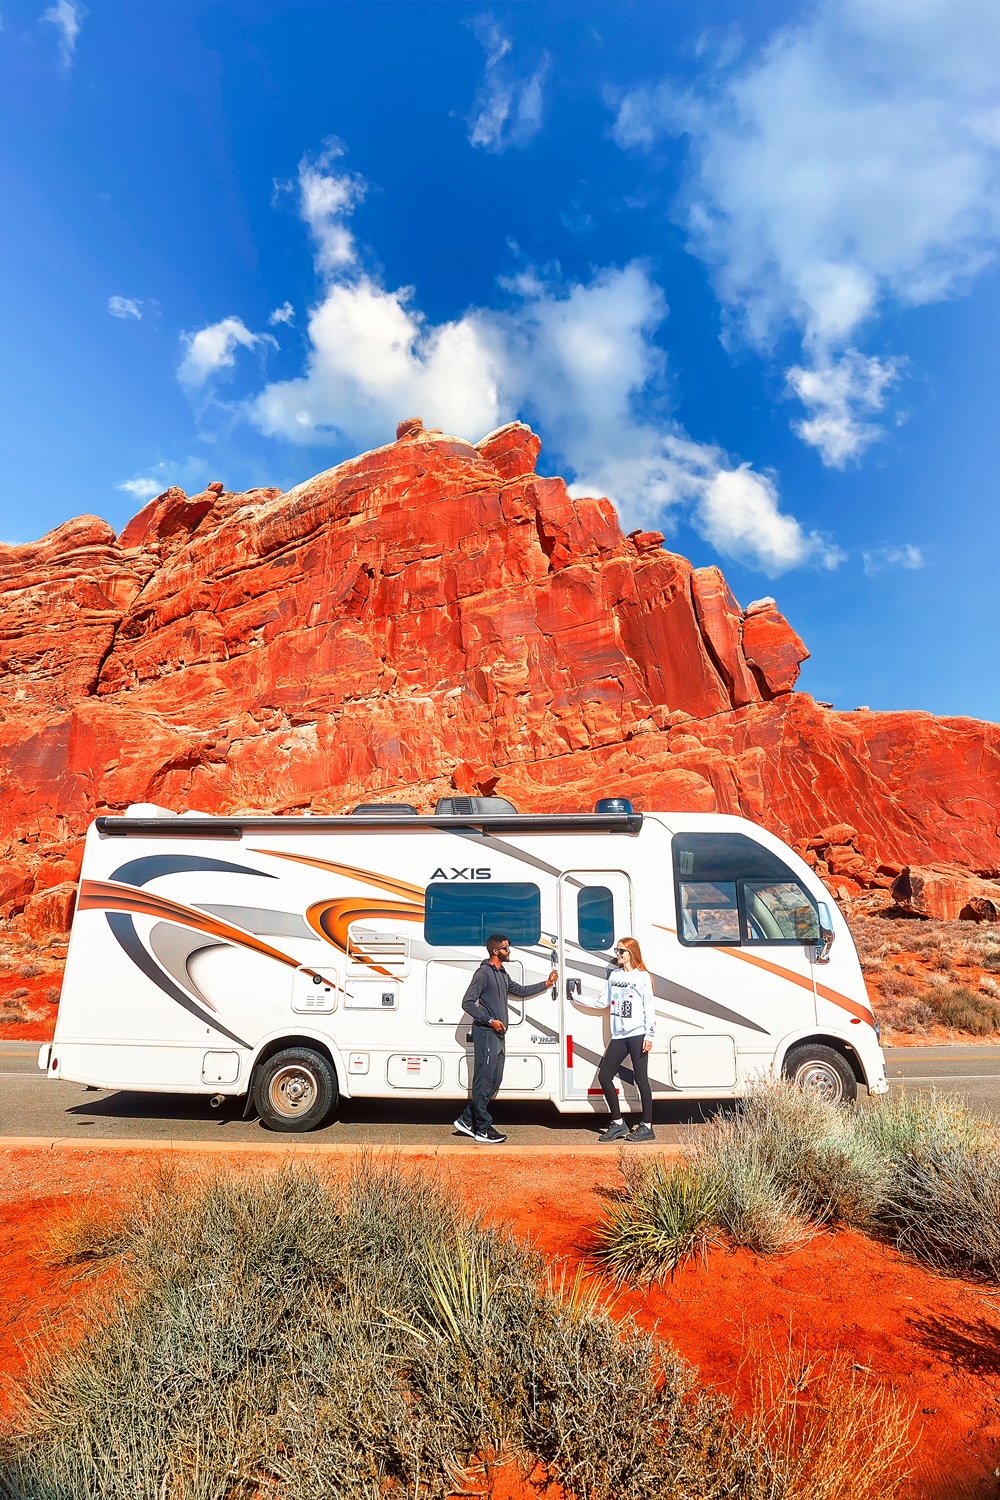 Couple standing on the side of an RV next to a red rock formation on a Utah road trip.